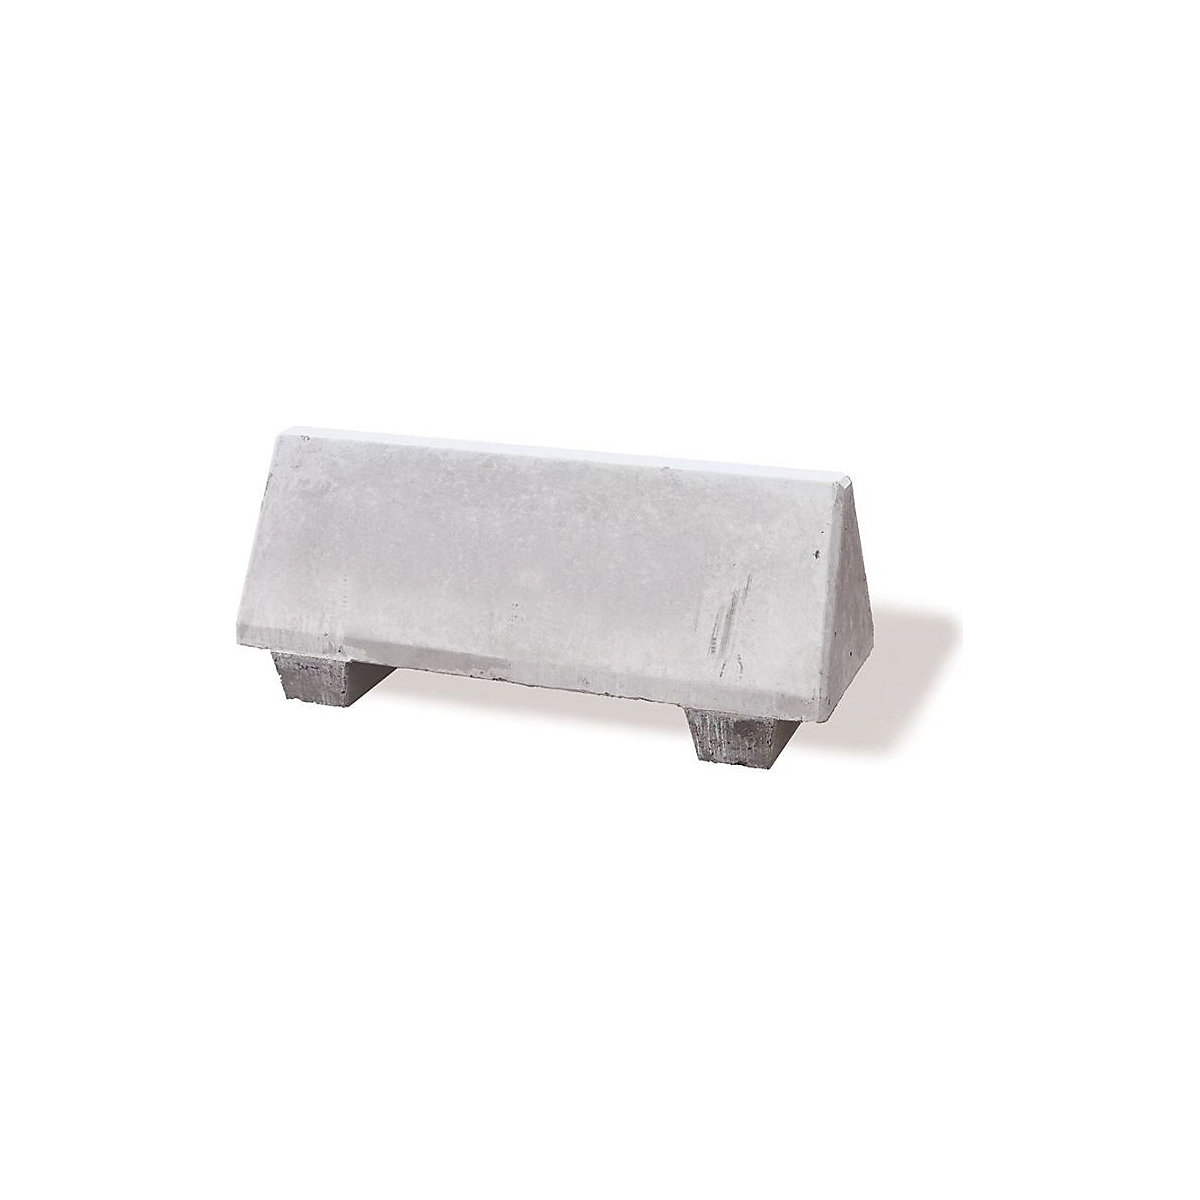 Concrete barrier, LxWxH 1090 x 390 x 465 mm, pack of 2, grey-3